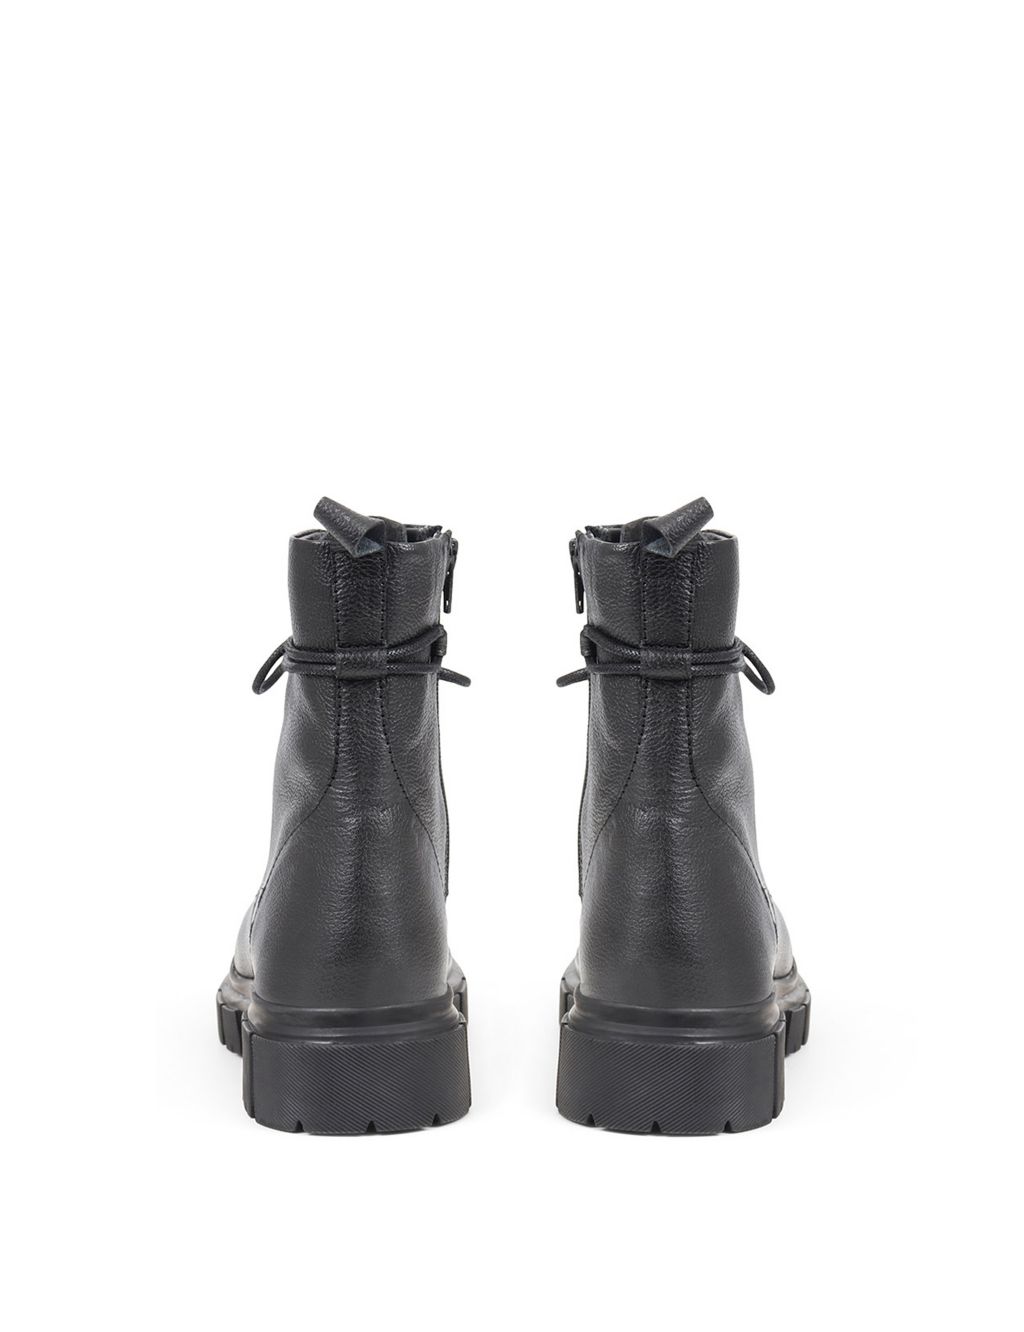 Leather Biker Lace Up Cleated Ankle Boots image 5